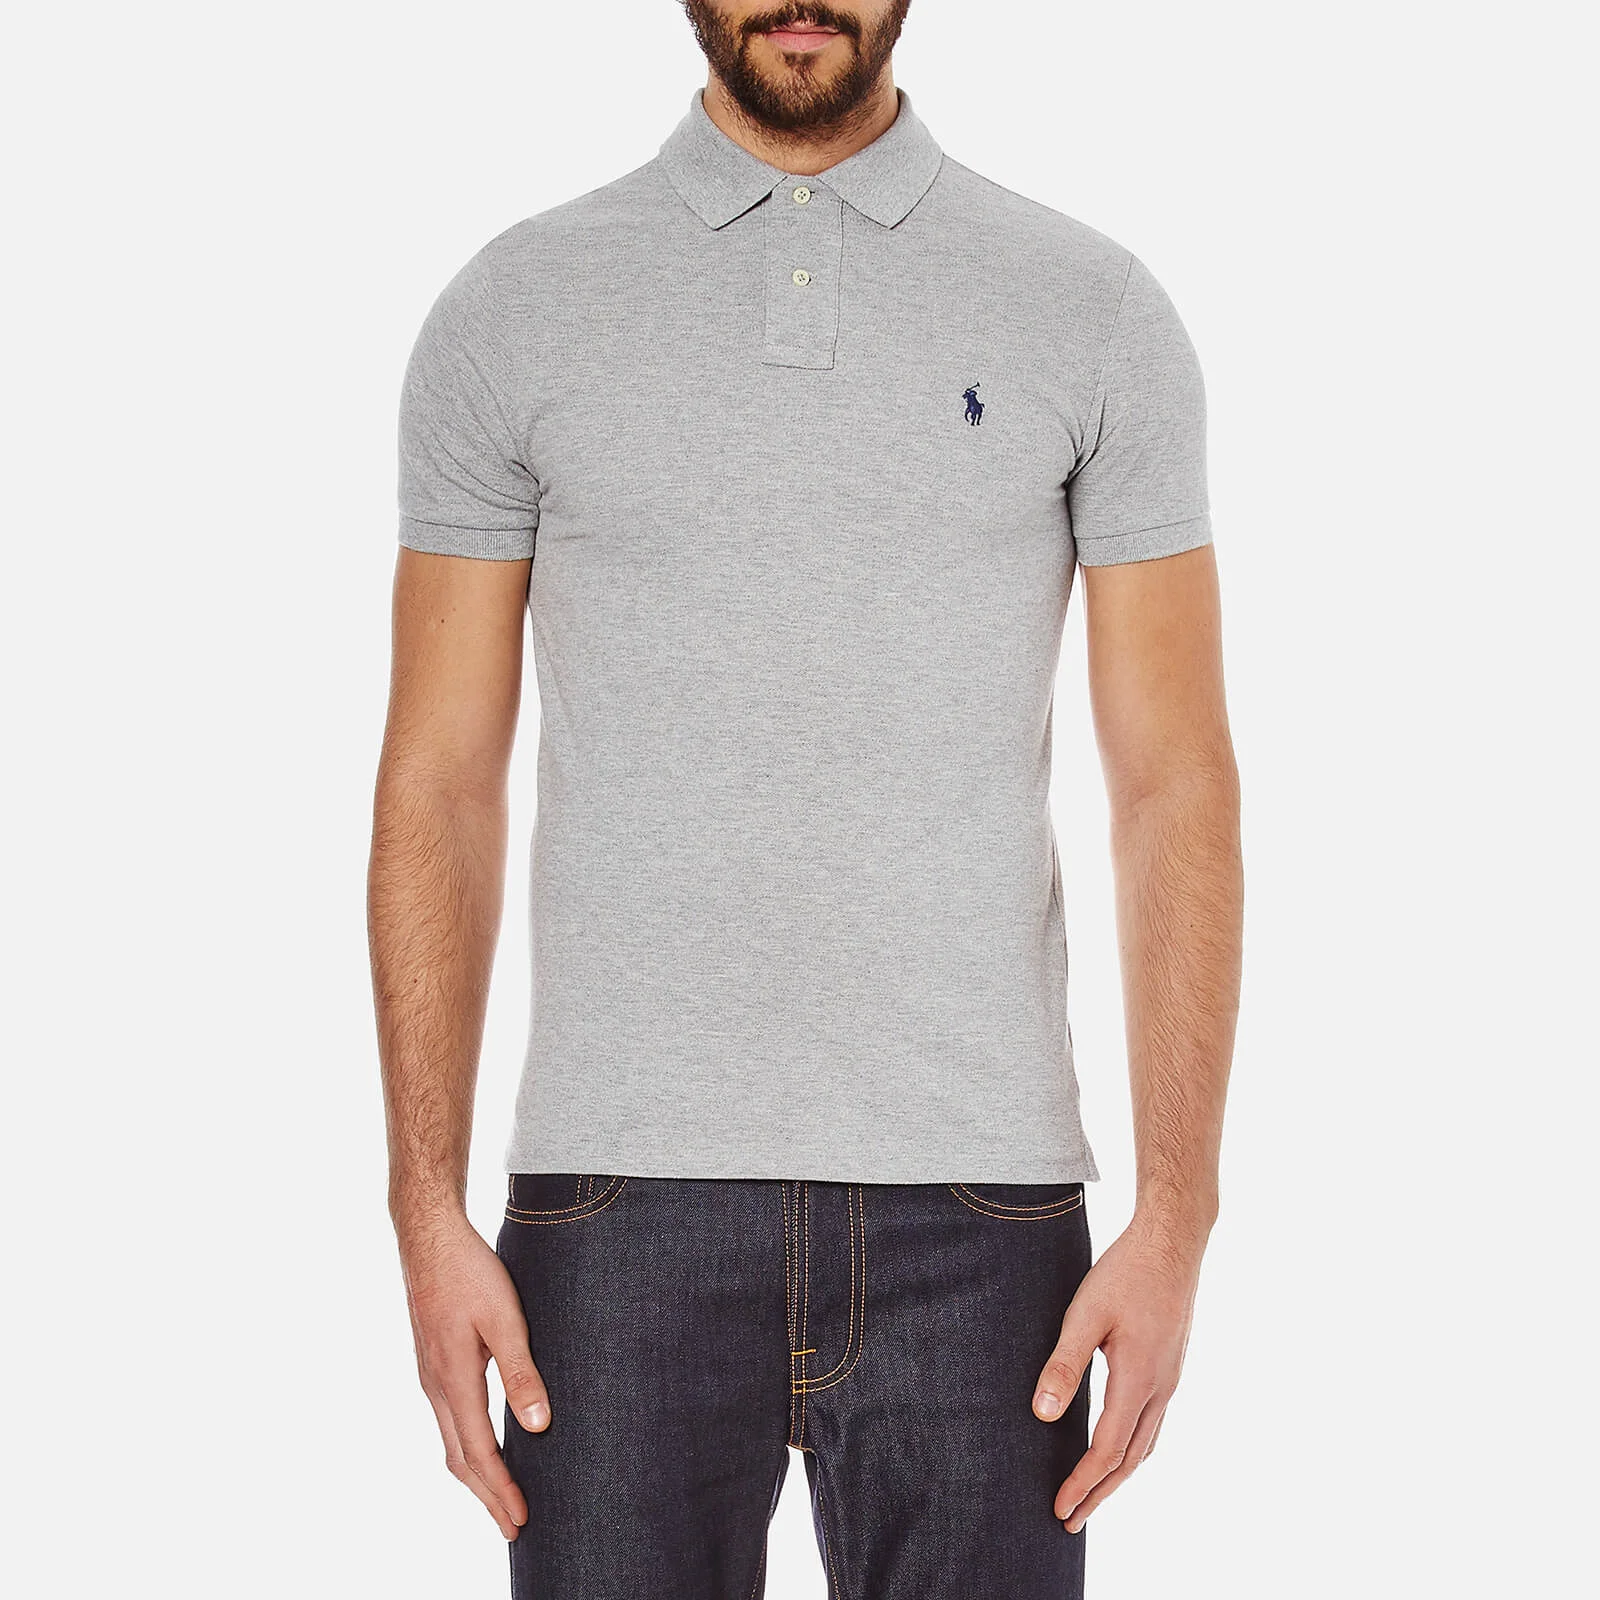 Polo Ralph Lauren Men's Slim Fit Short Sleeved Polo Shirt - Andover Heather Image 1